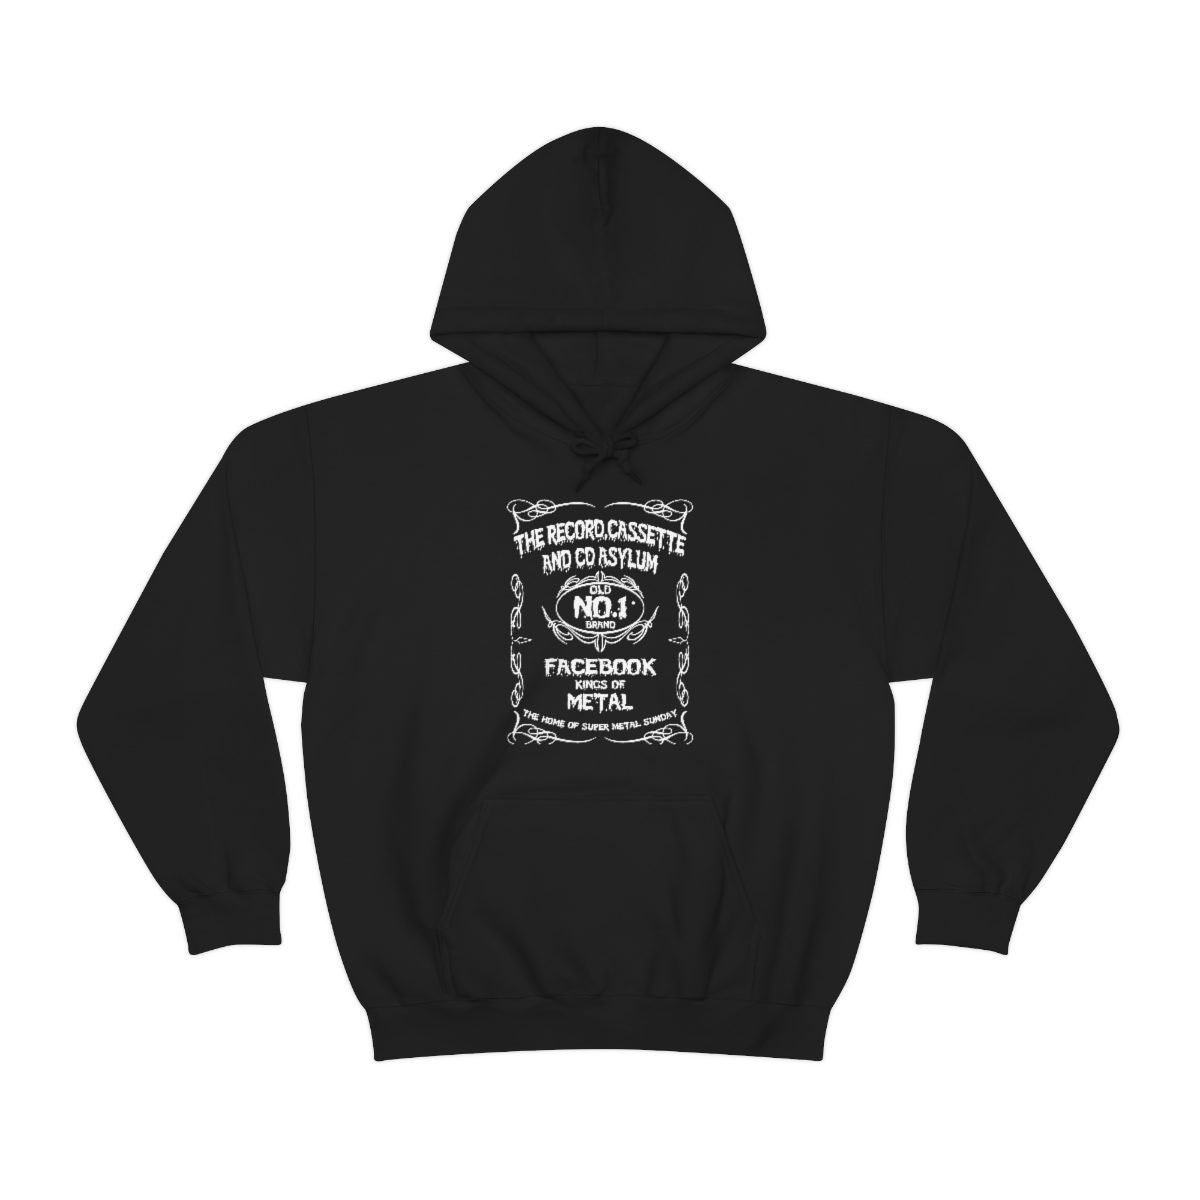 The Record, Cassette, and CD Asylum – Facebook Kings Pullover Hooded Sweatshirt